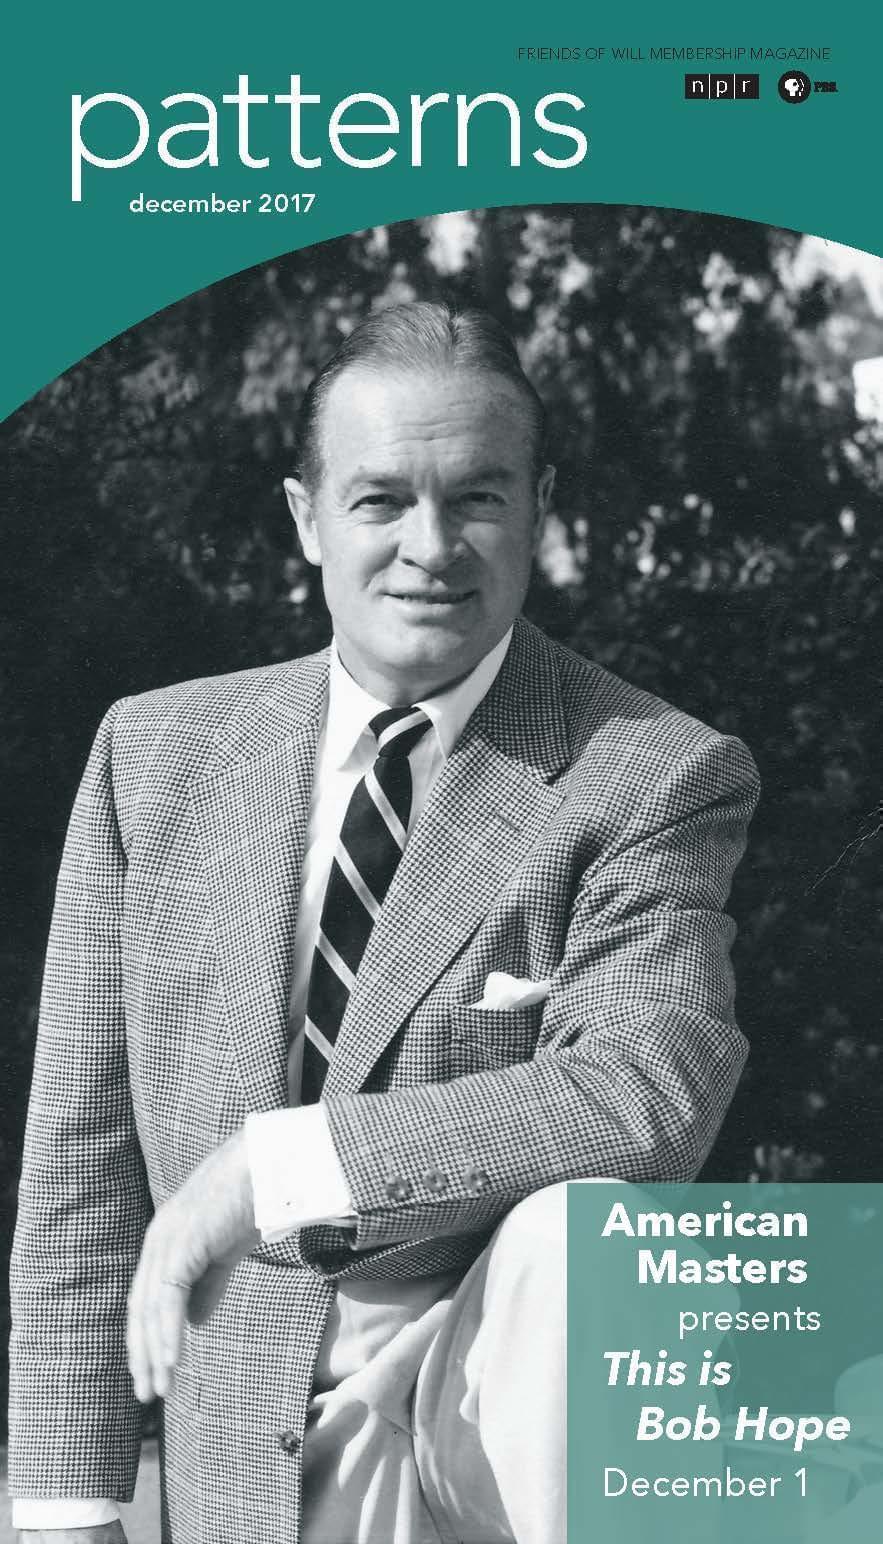 American Masters presents This is Bob Hope